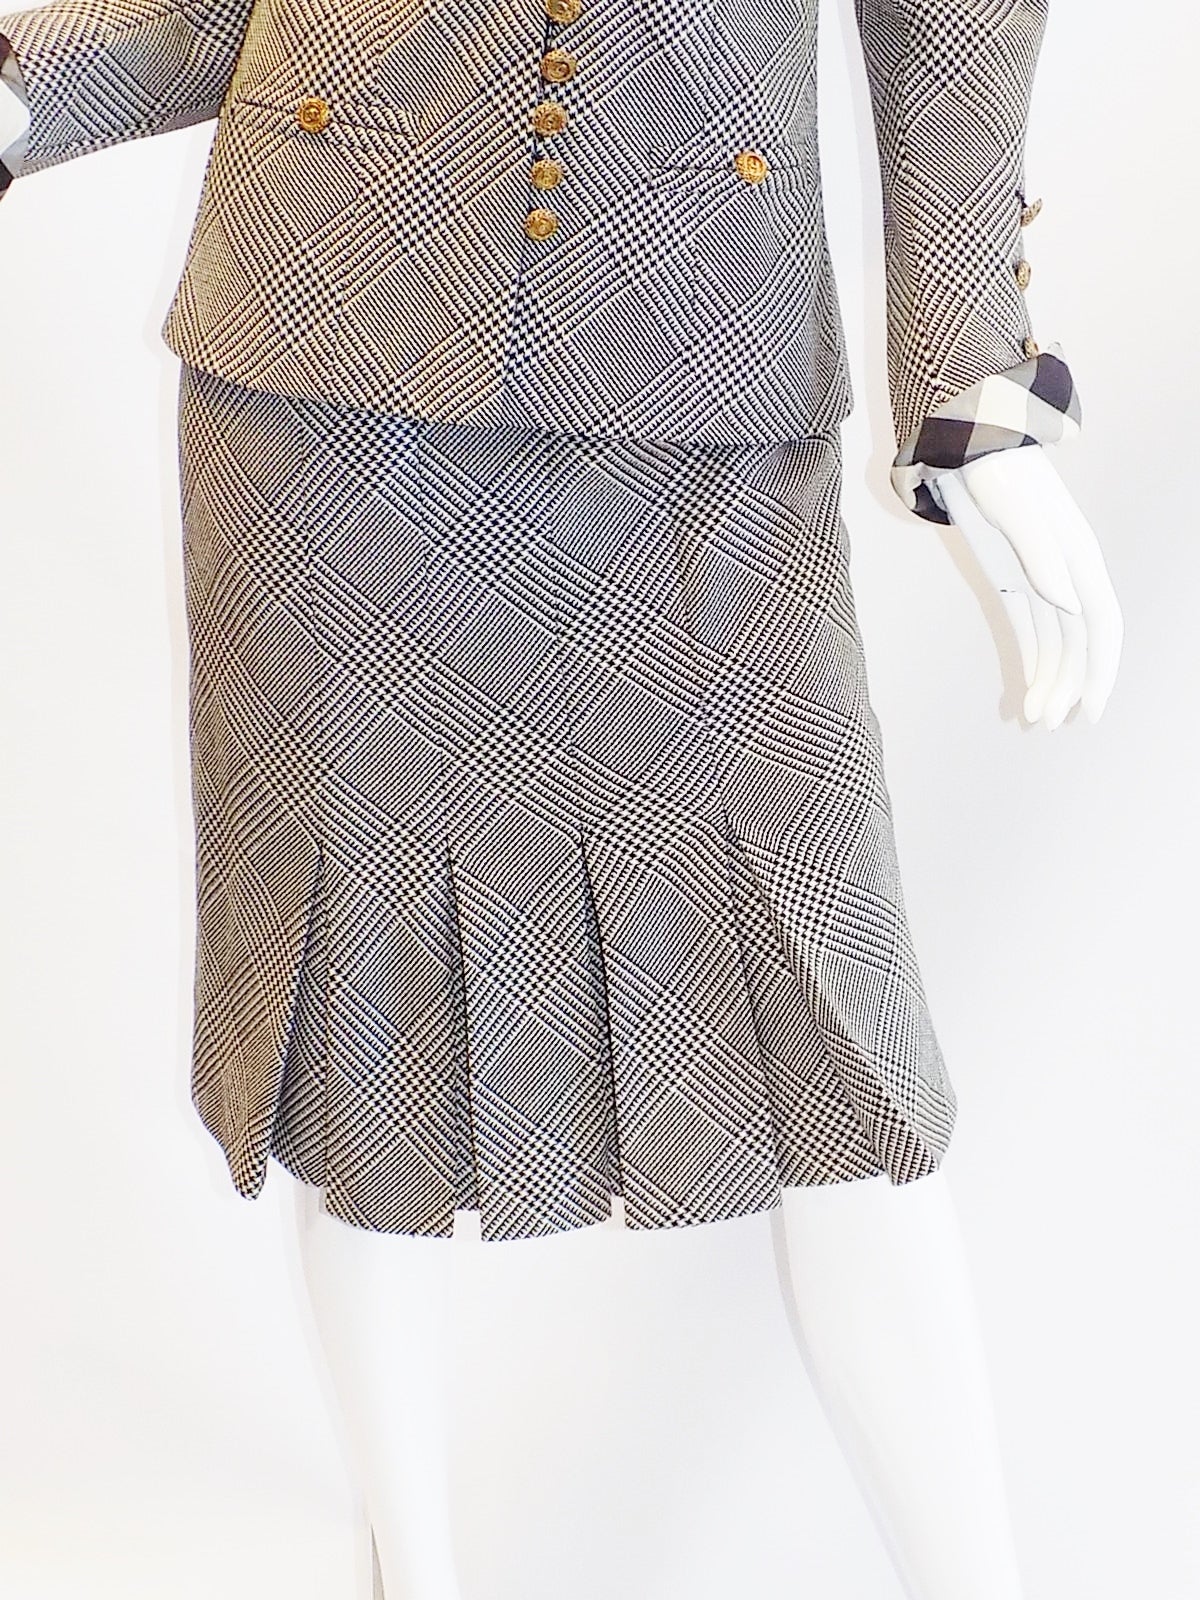 CHANEL  Haute Couture  1978  Stunning plaid skirt suit 1